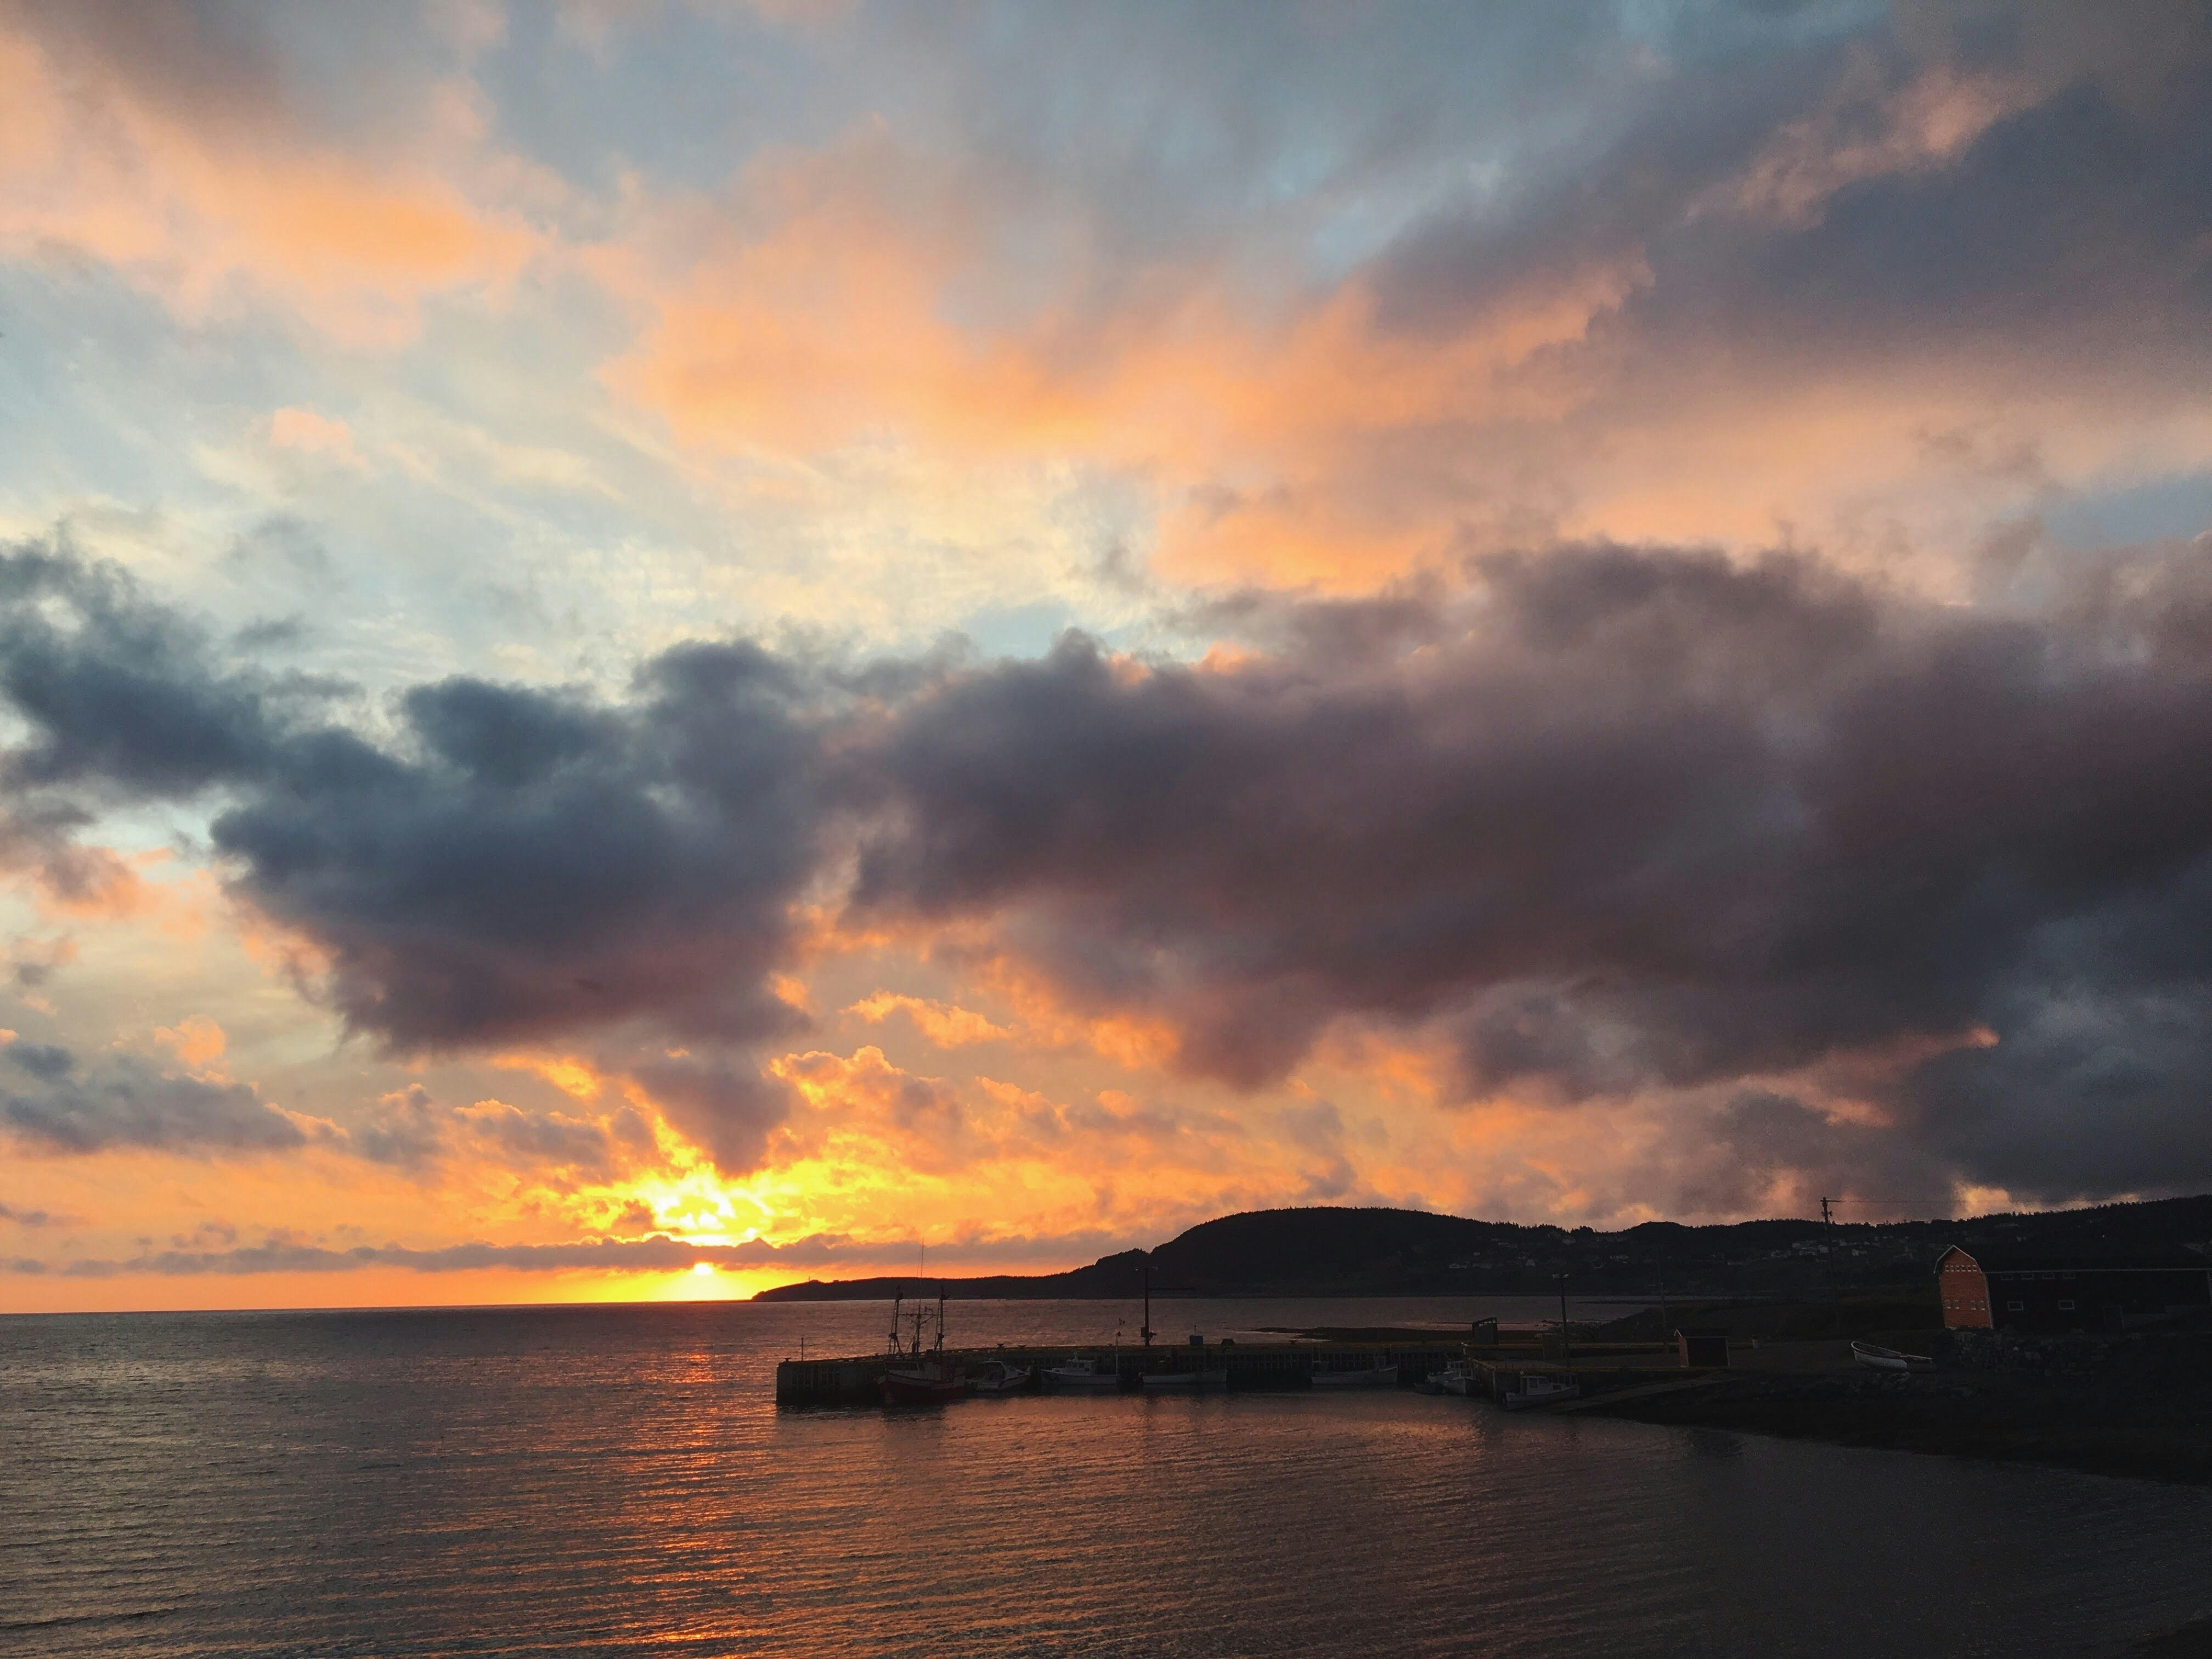 A sunset over a body of water paints a cloudy sky in shades of orange and pink. To the left of the images is a jetty and a simple building.